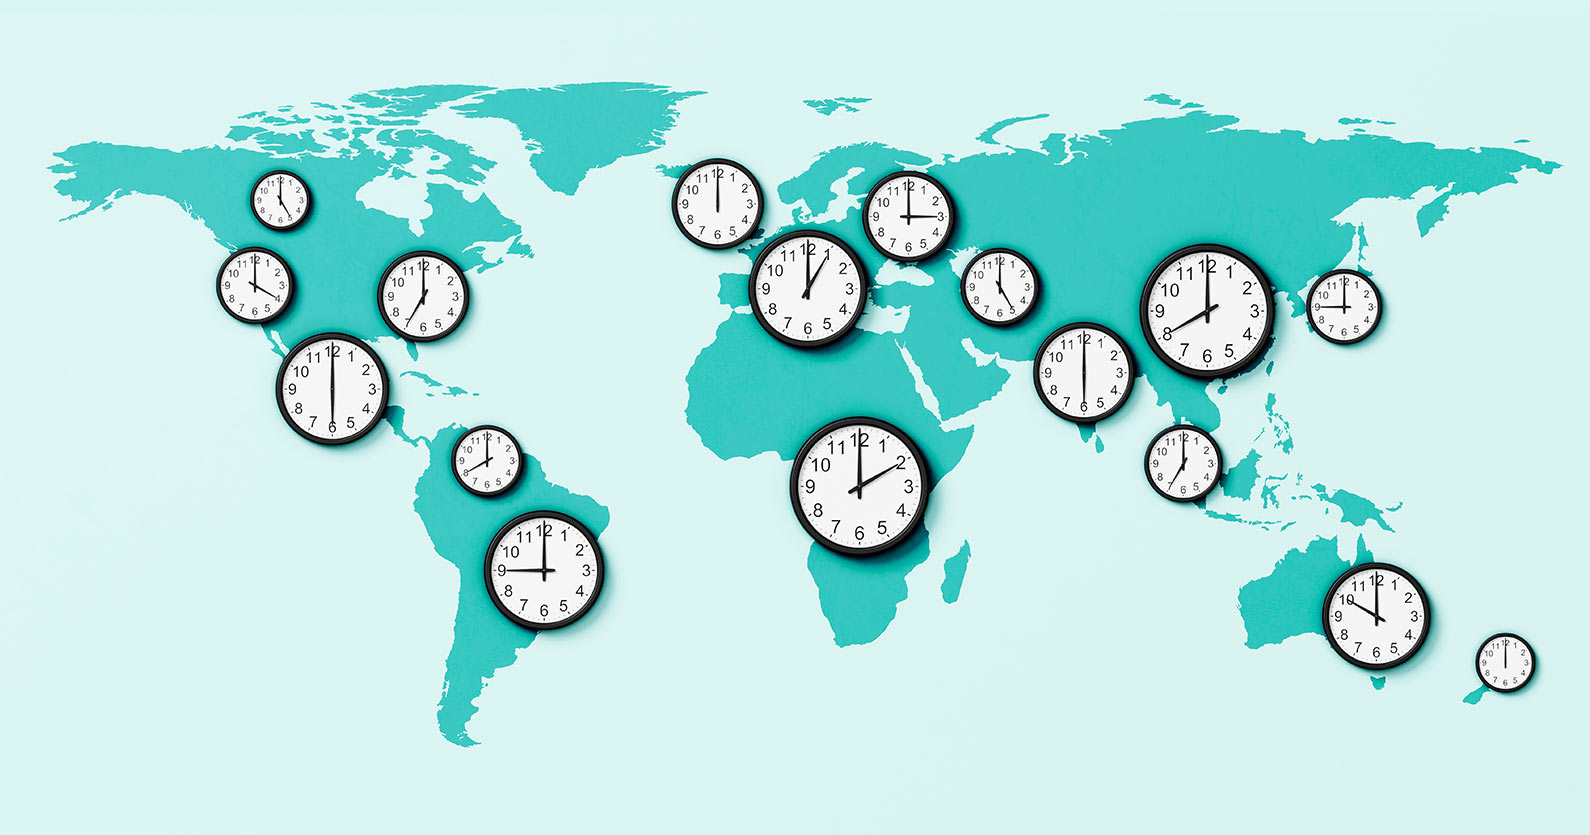 Illustration of a world map with clock faces over it